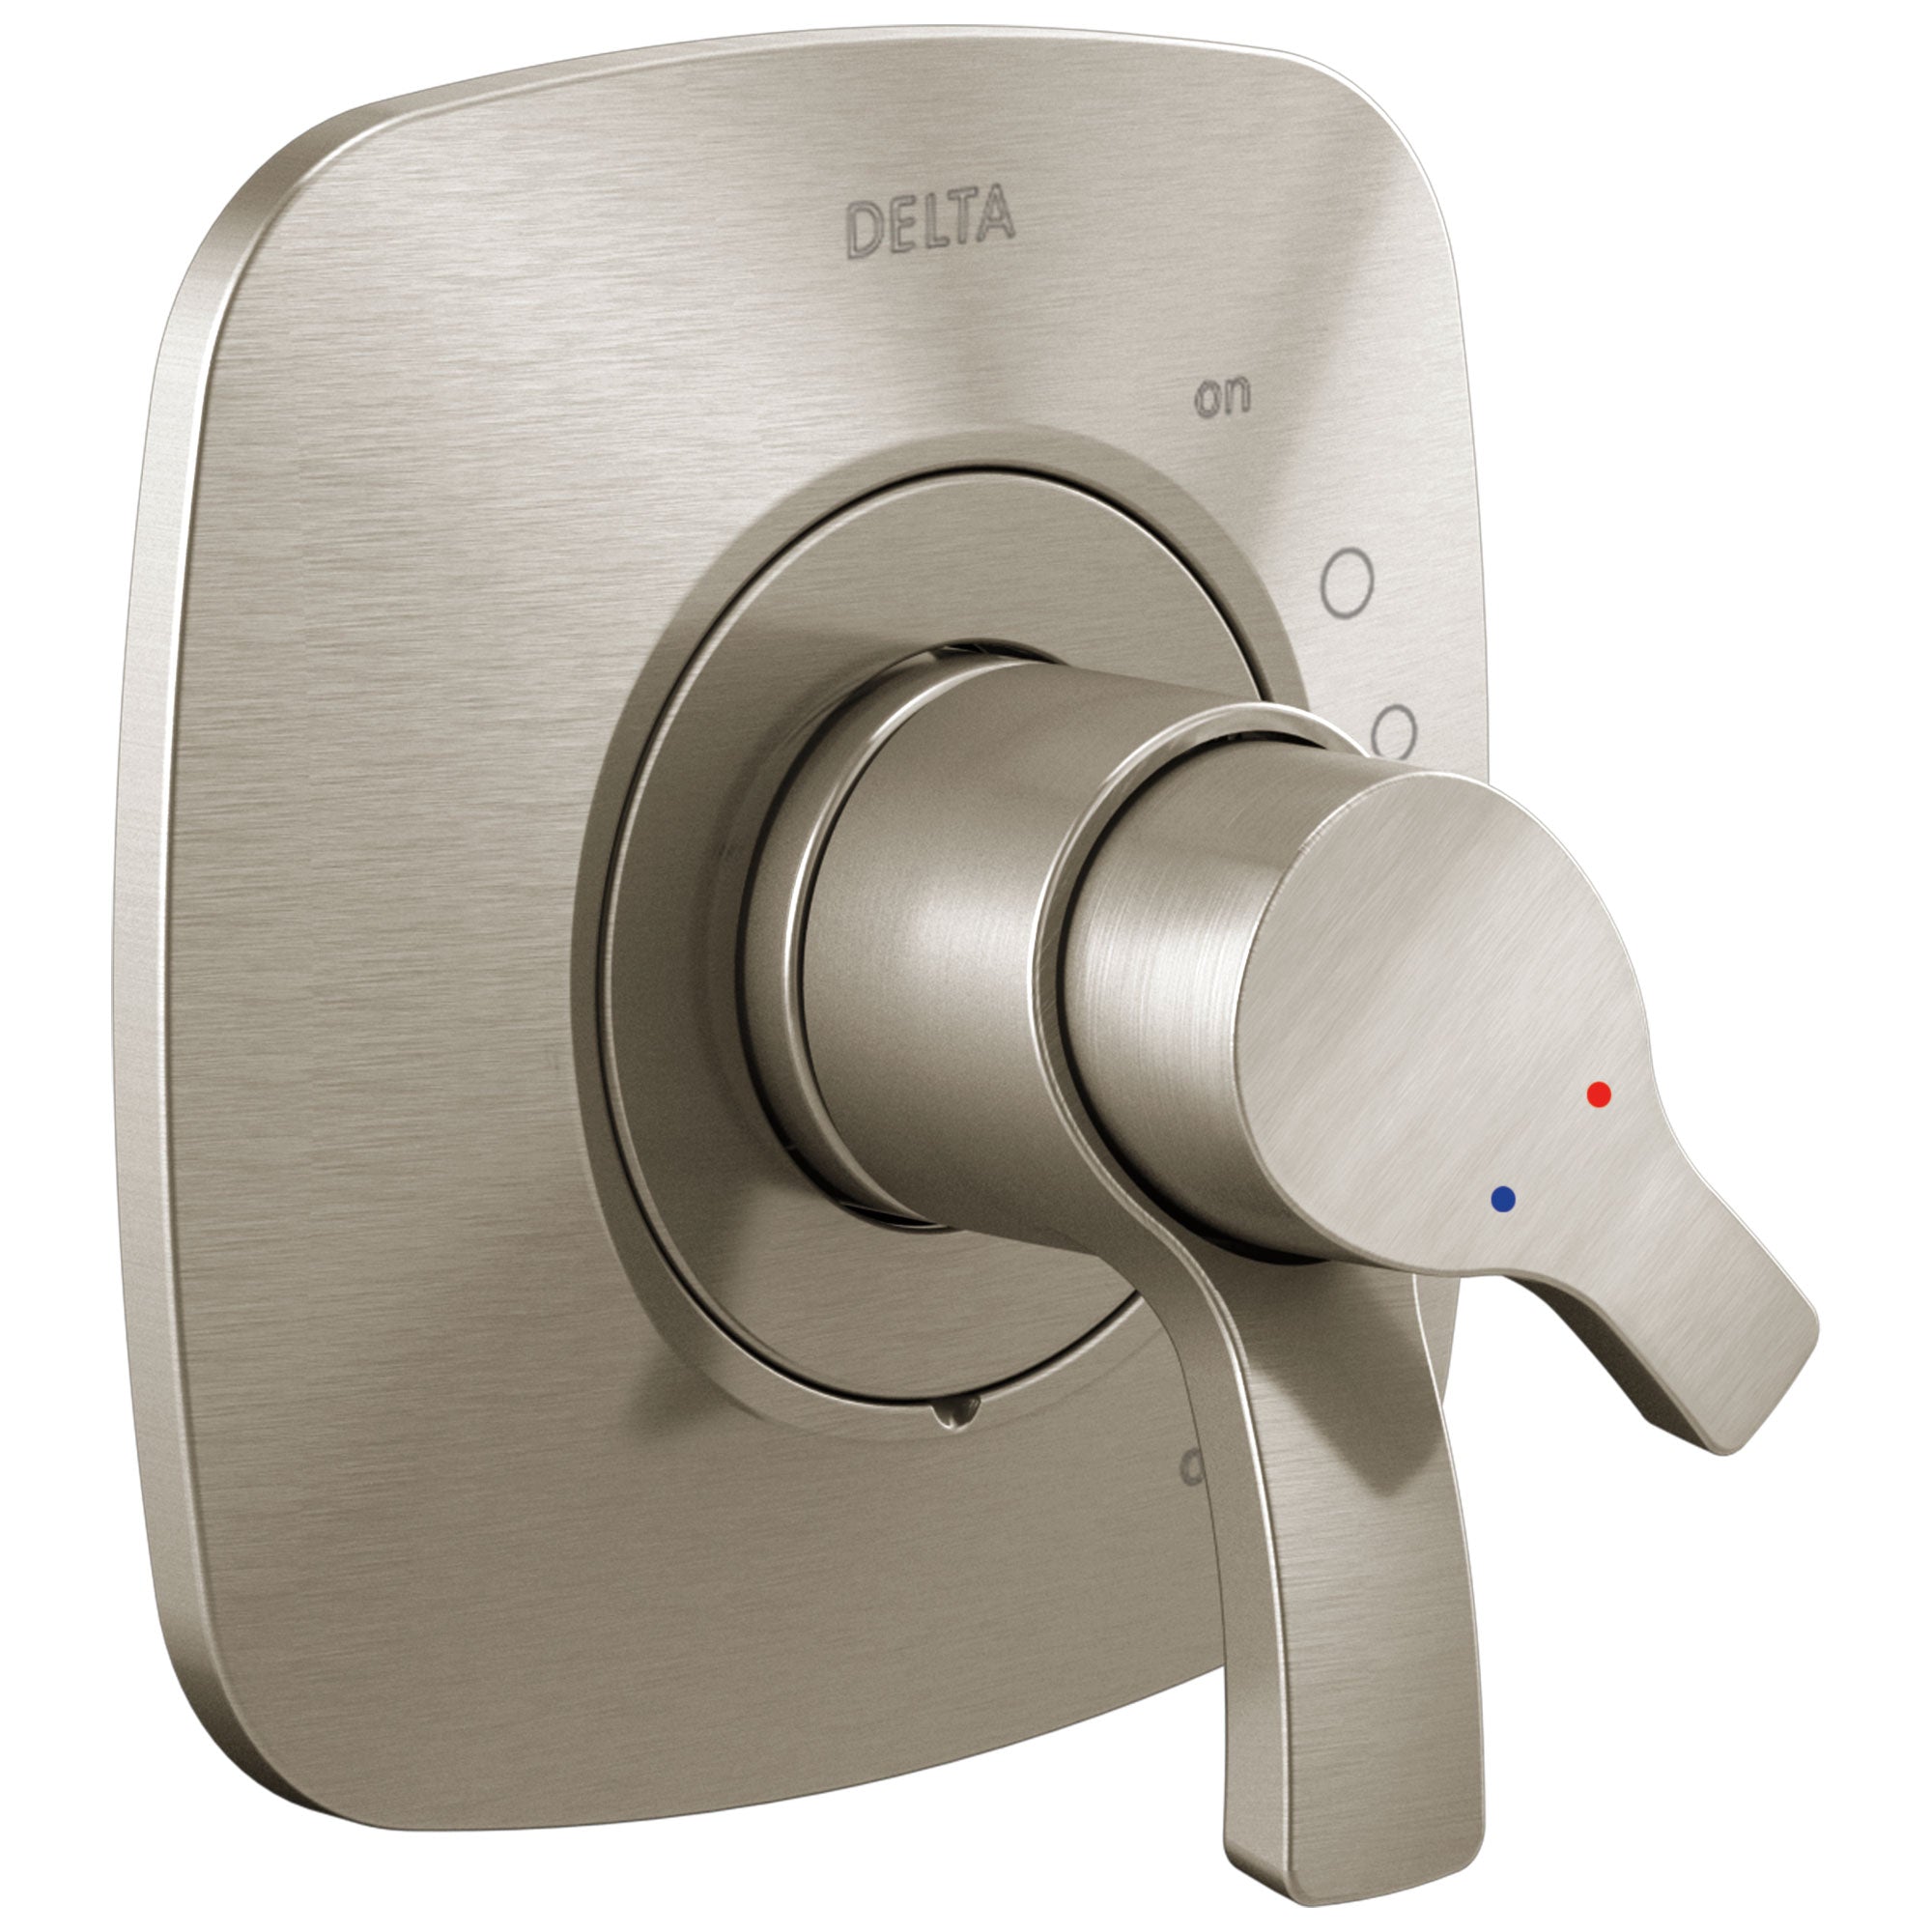 Delta Tesla Collection Stainless Steel Finish Monitor 17 Dual Temperature and Water Pressure Shower Faucet Control Handle Trim (Requires Valve) 732788